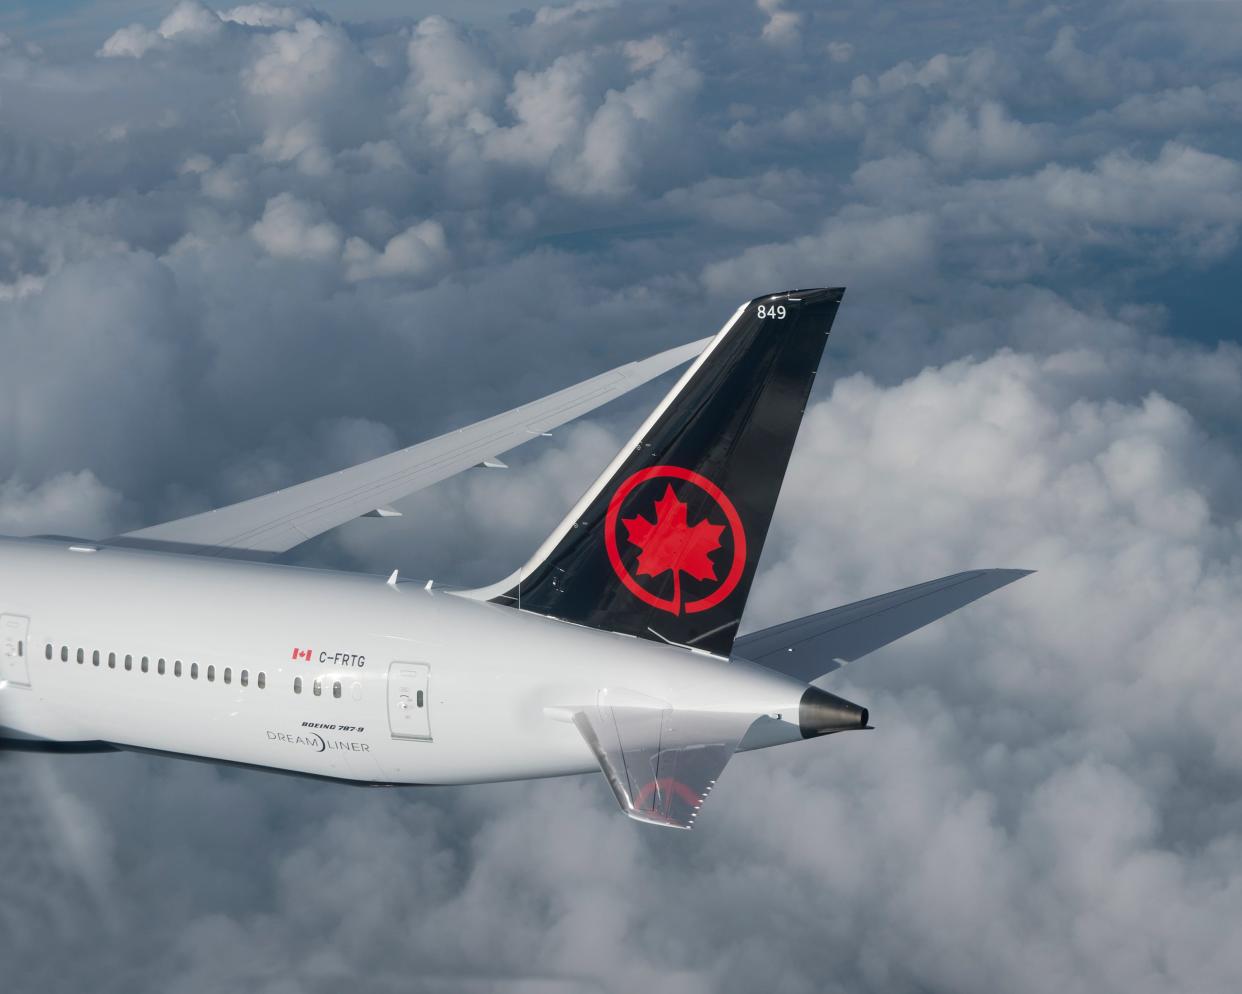 Air Canada announced a summer trans-border schedule with up to 220 daily flights between the USA and Canada as of Aug. 9.